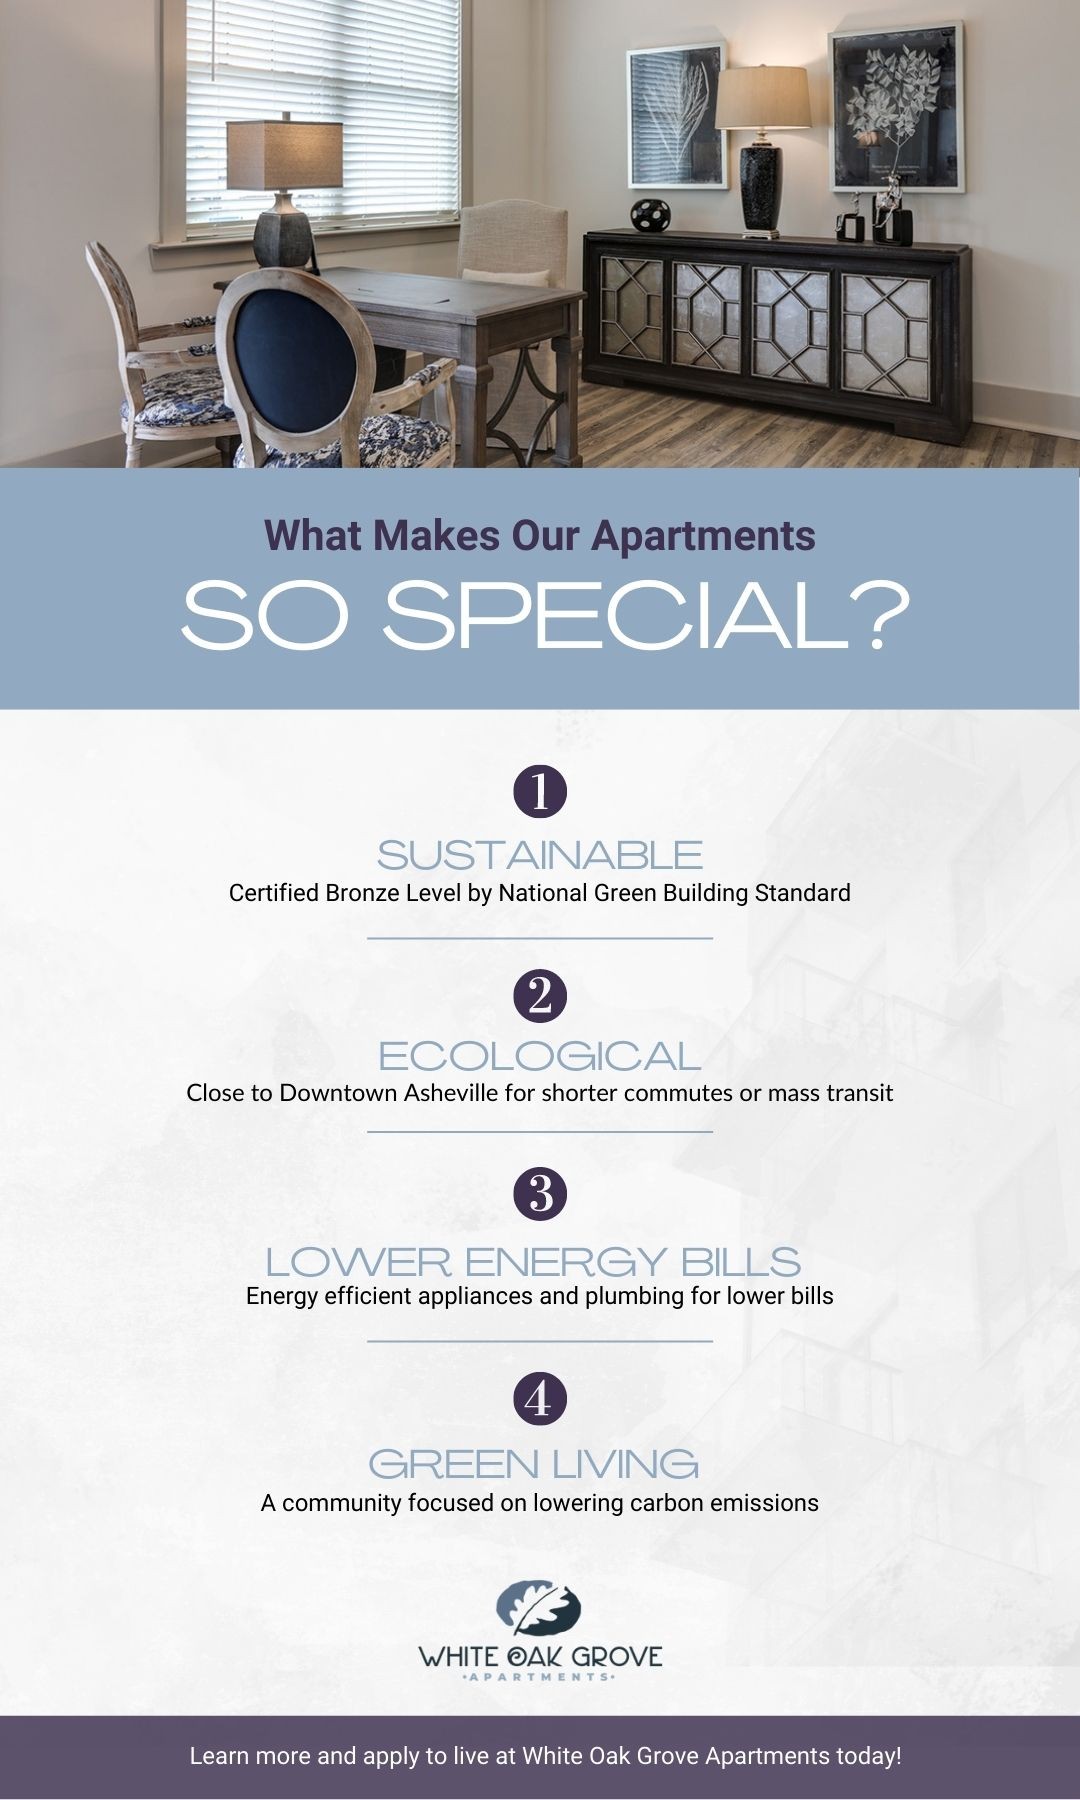 M26645 - What Makes Our Apartments So Special infographic.jpg